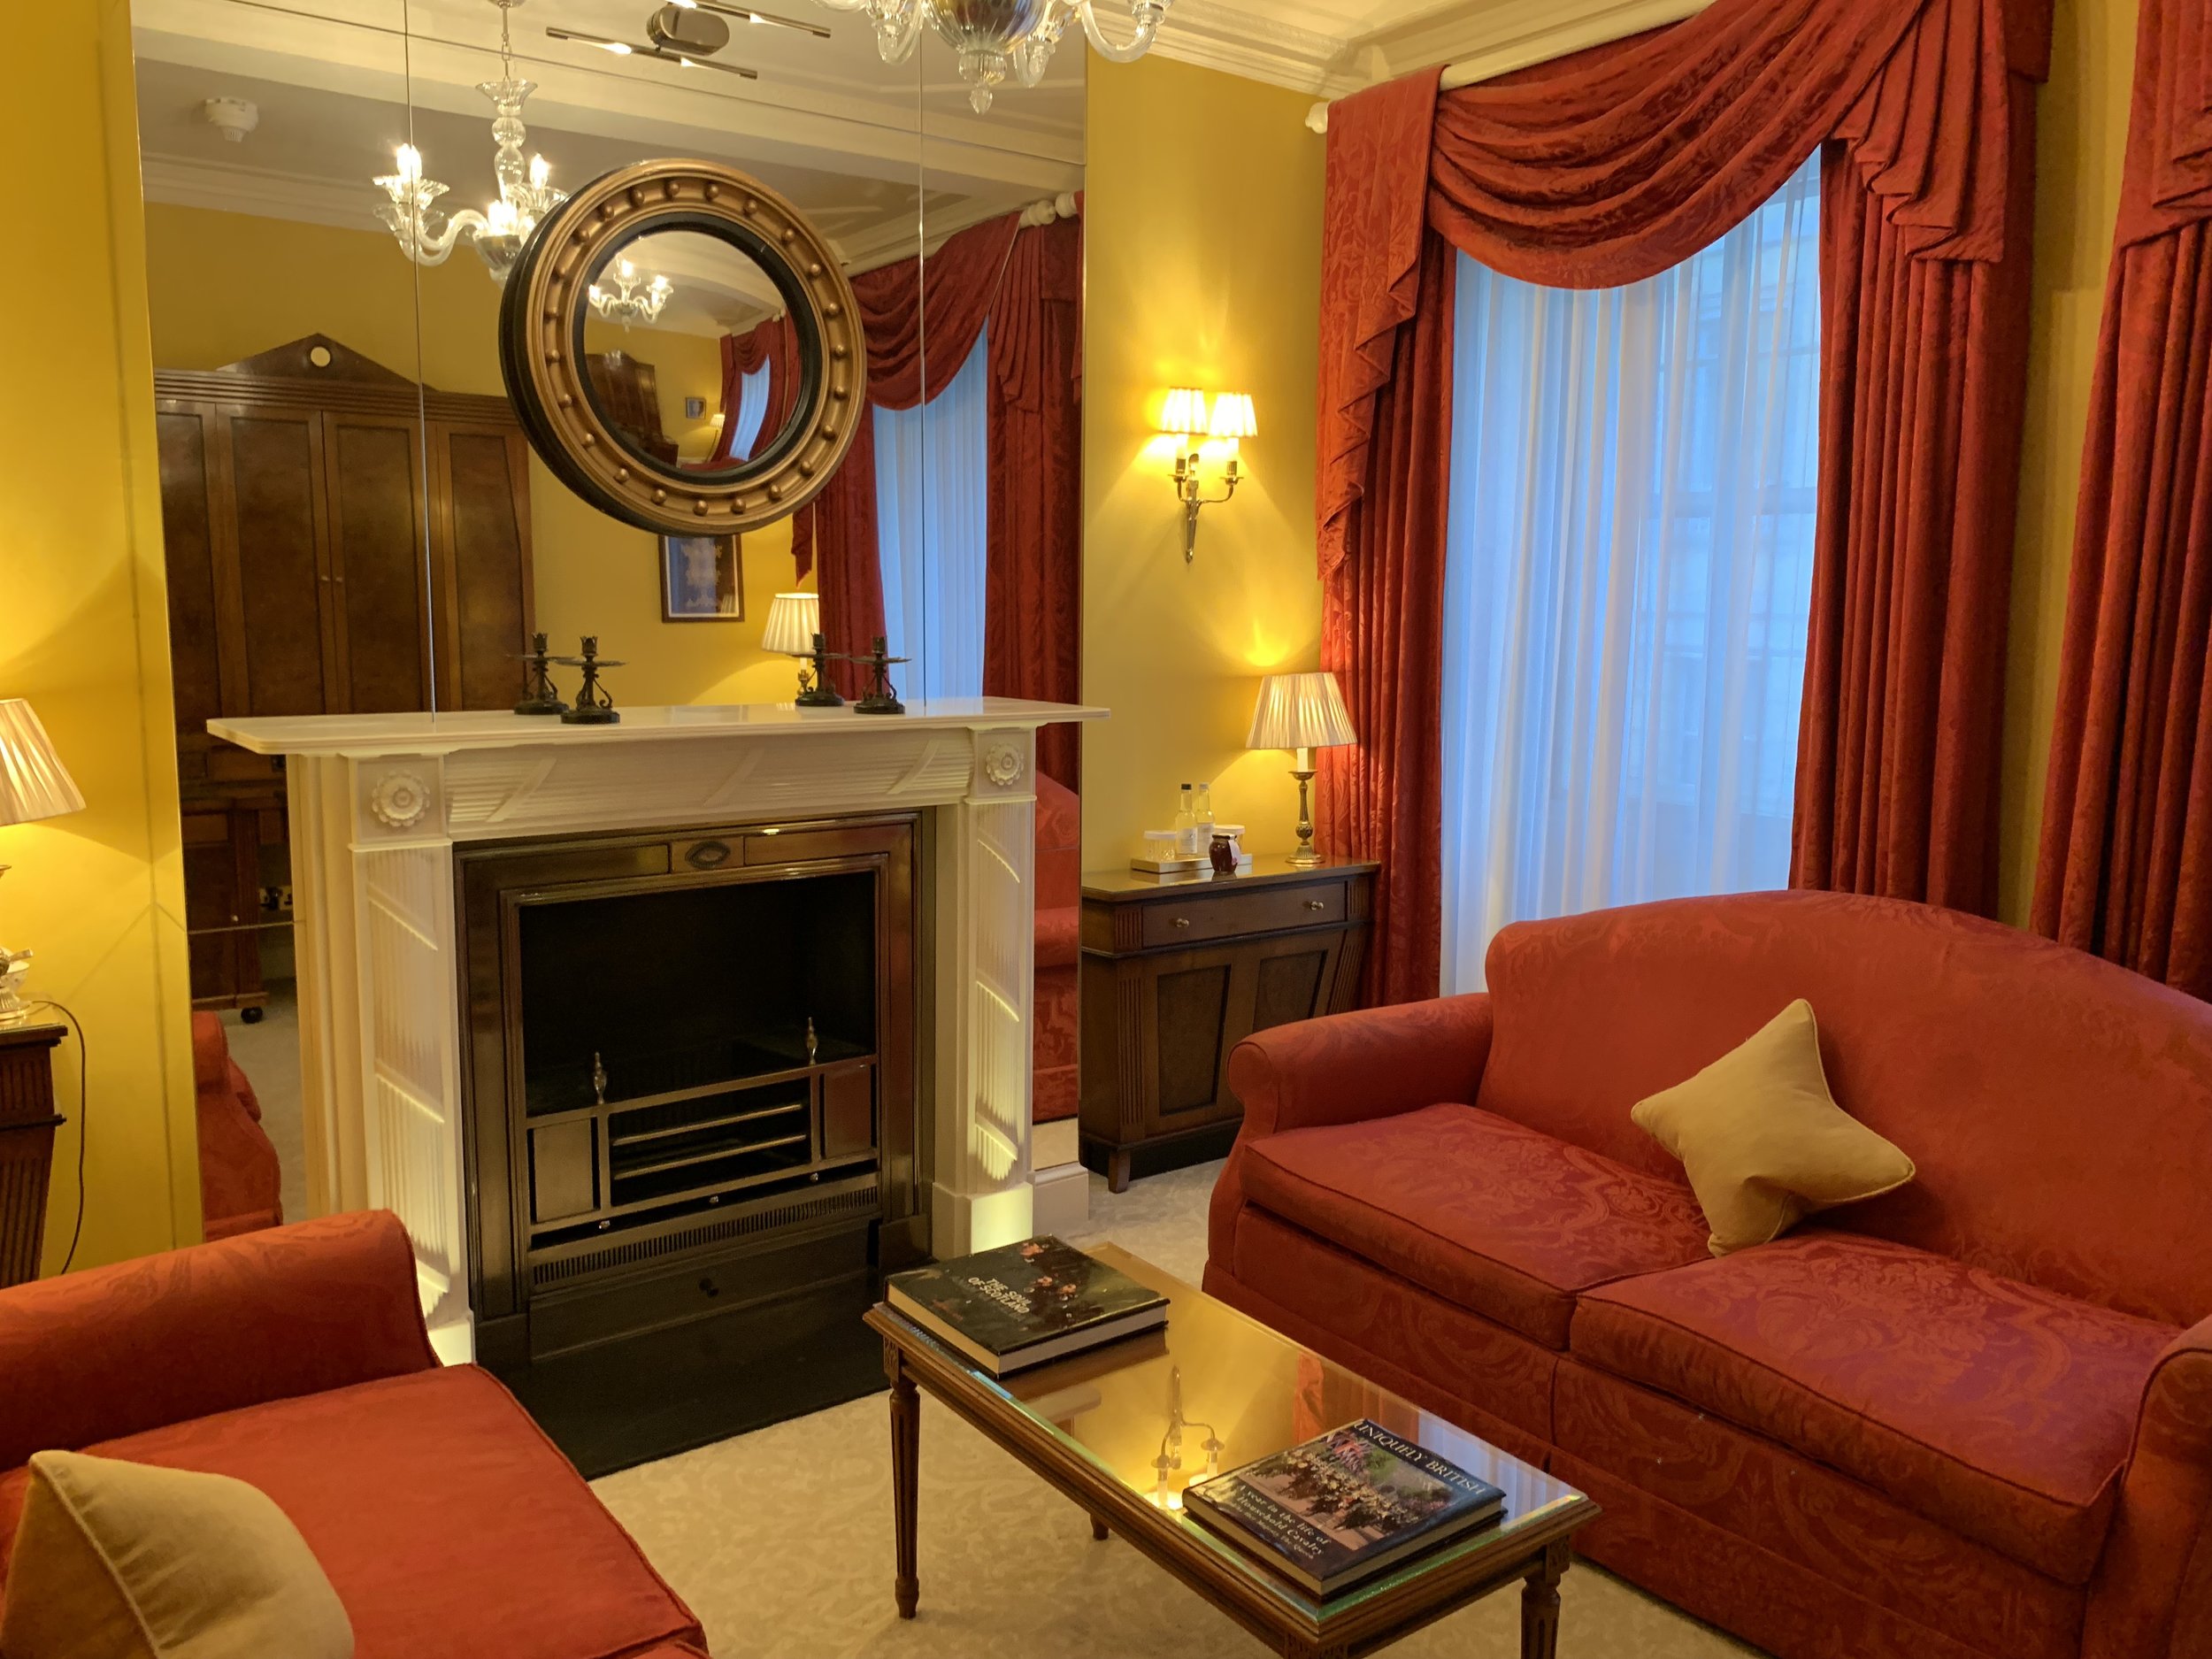 living area at the bedroom at the Goring one of the places Where to stay in London